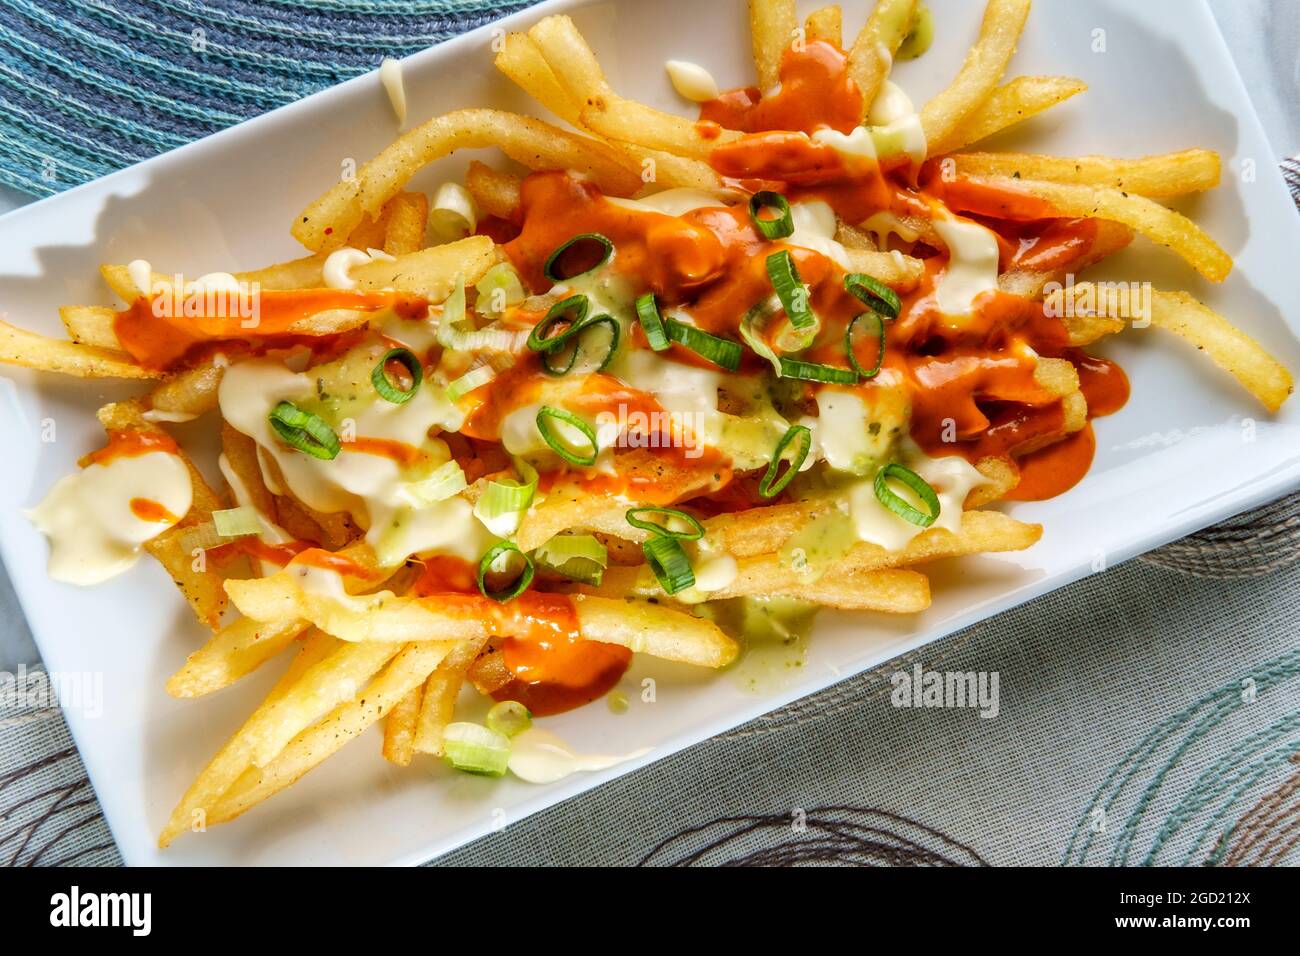 Loaded pepper jack cheese fries with chipotle sauce and scallions Stock Photo